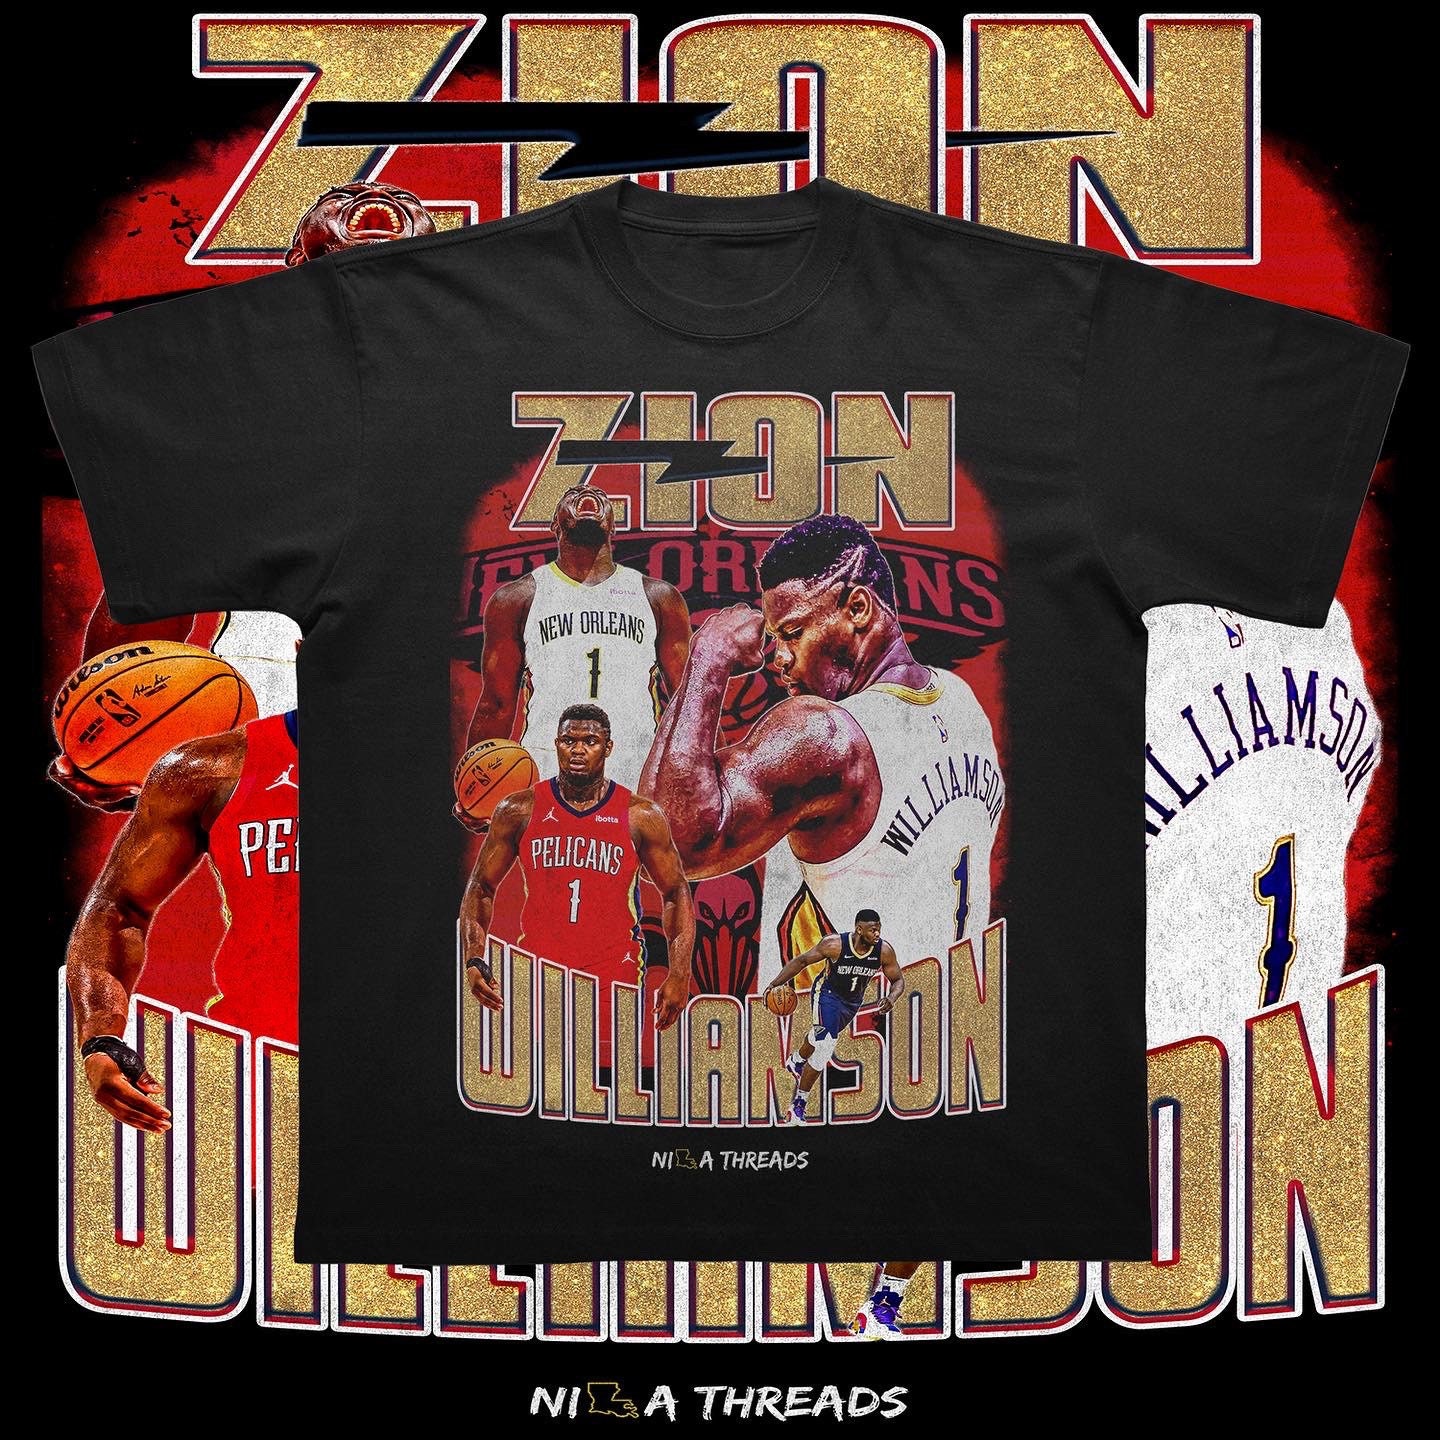 Discover Zion Williamson Graphic Shirt, New Orleans Graphics Shirt